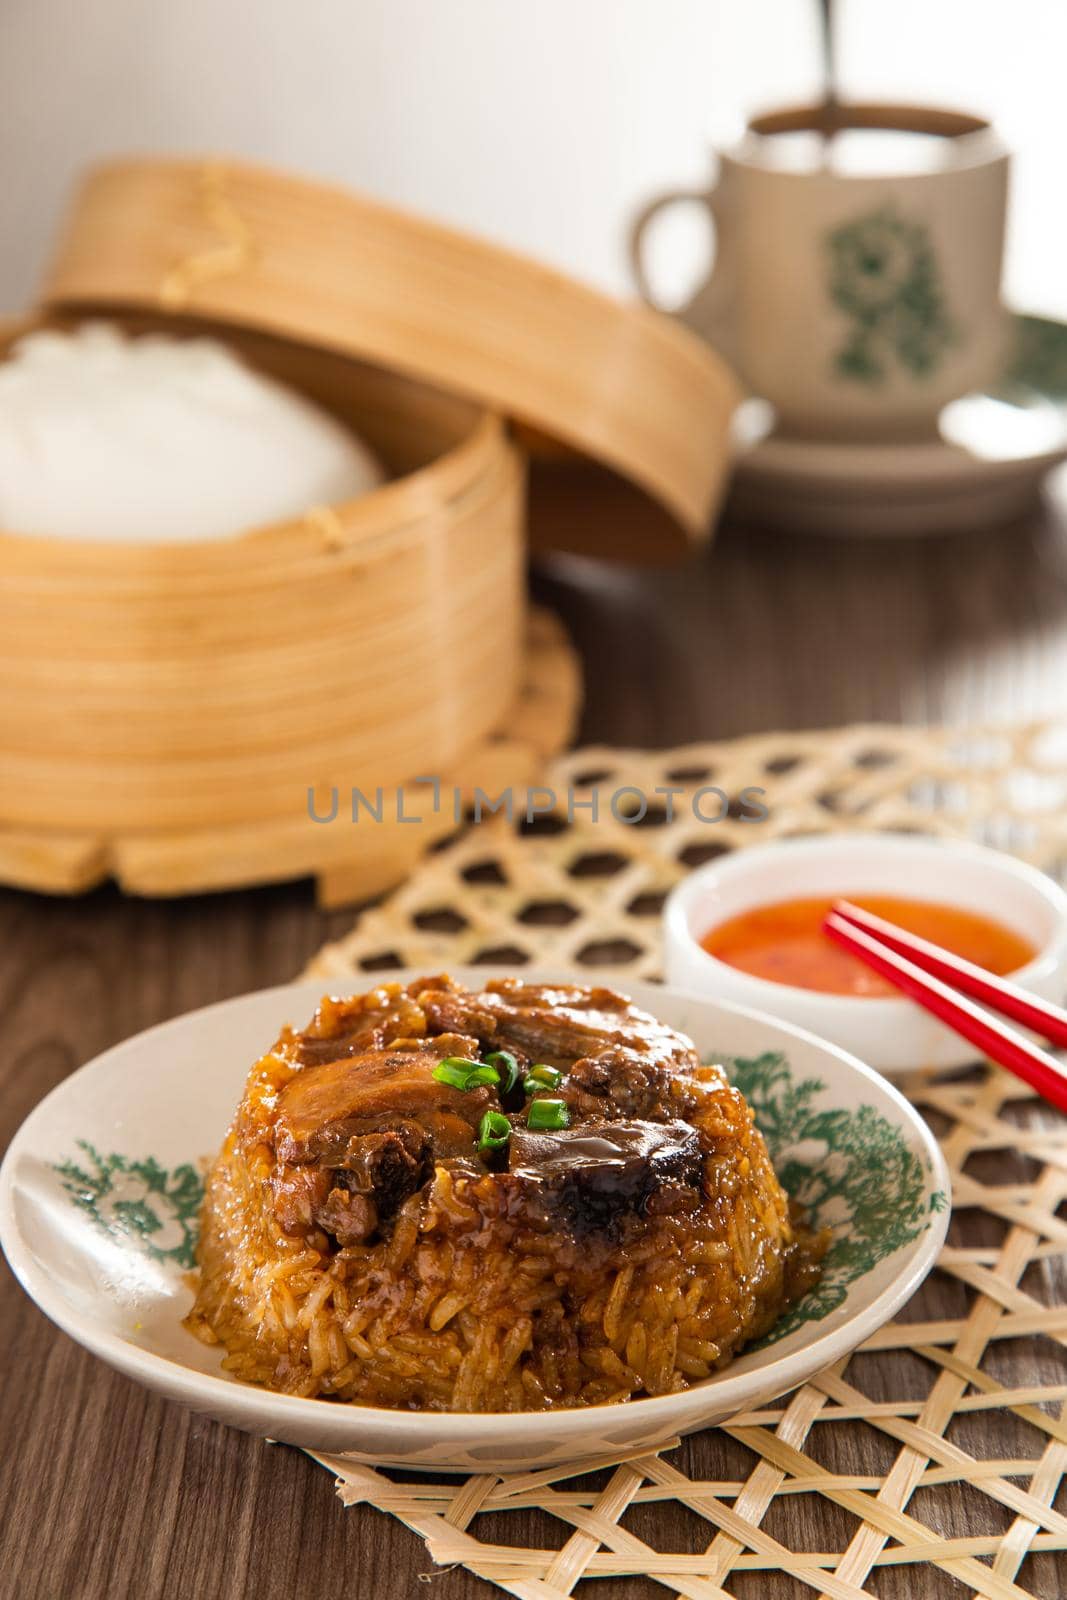 Dim Sum Loh Mai Kai. Steamed Glutinous Rice with chicken mushrooms and sausage by tehcheesiong